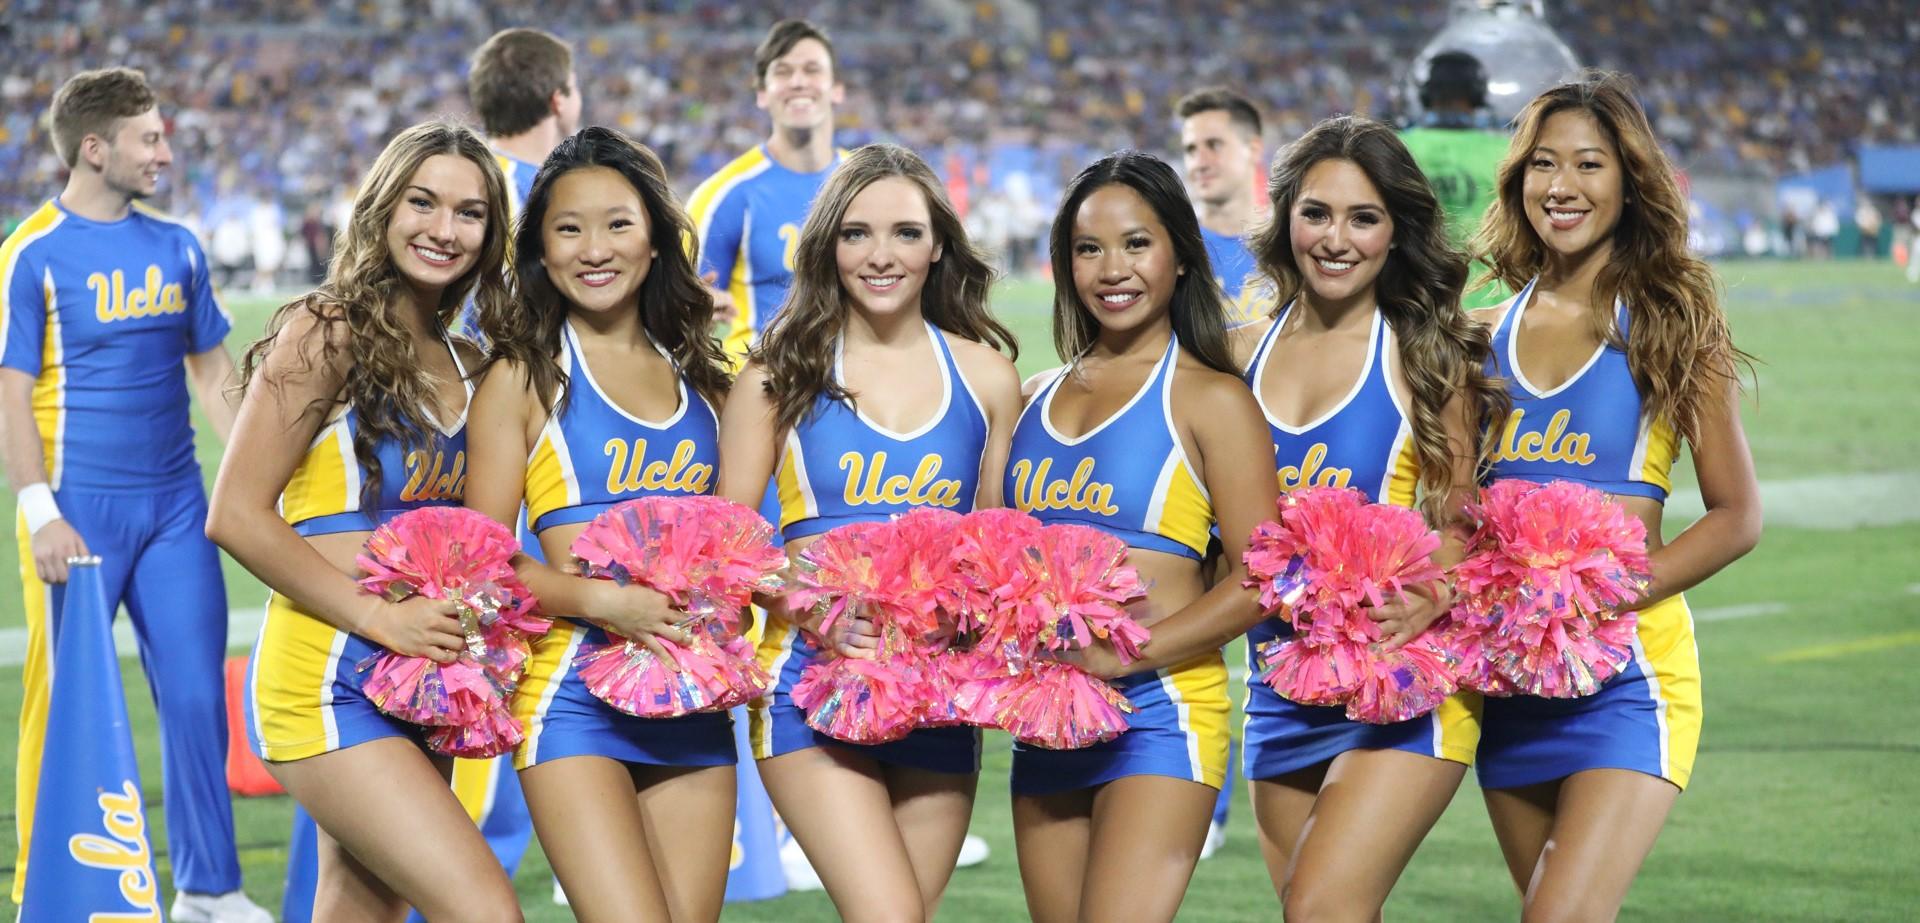 Members of our Cheer Squad at the football games versus ASU